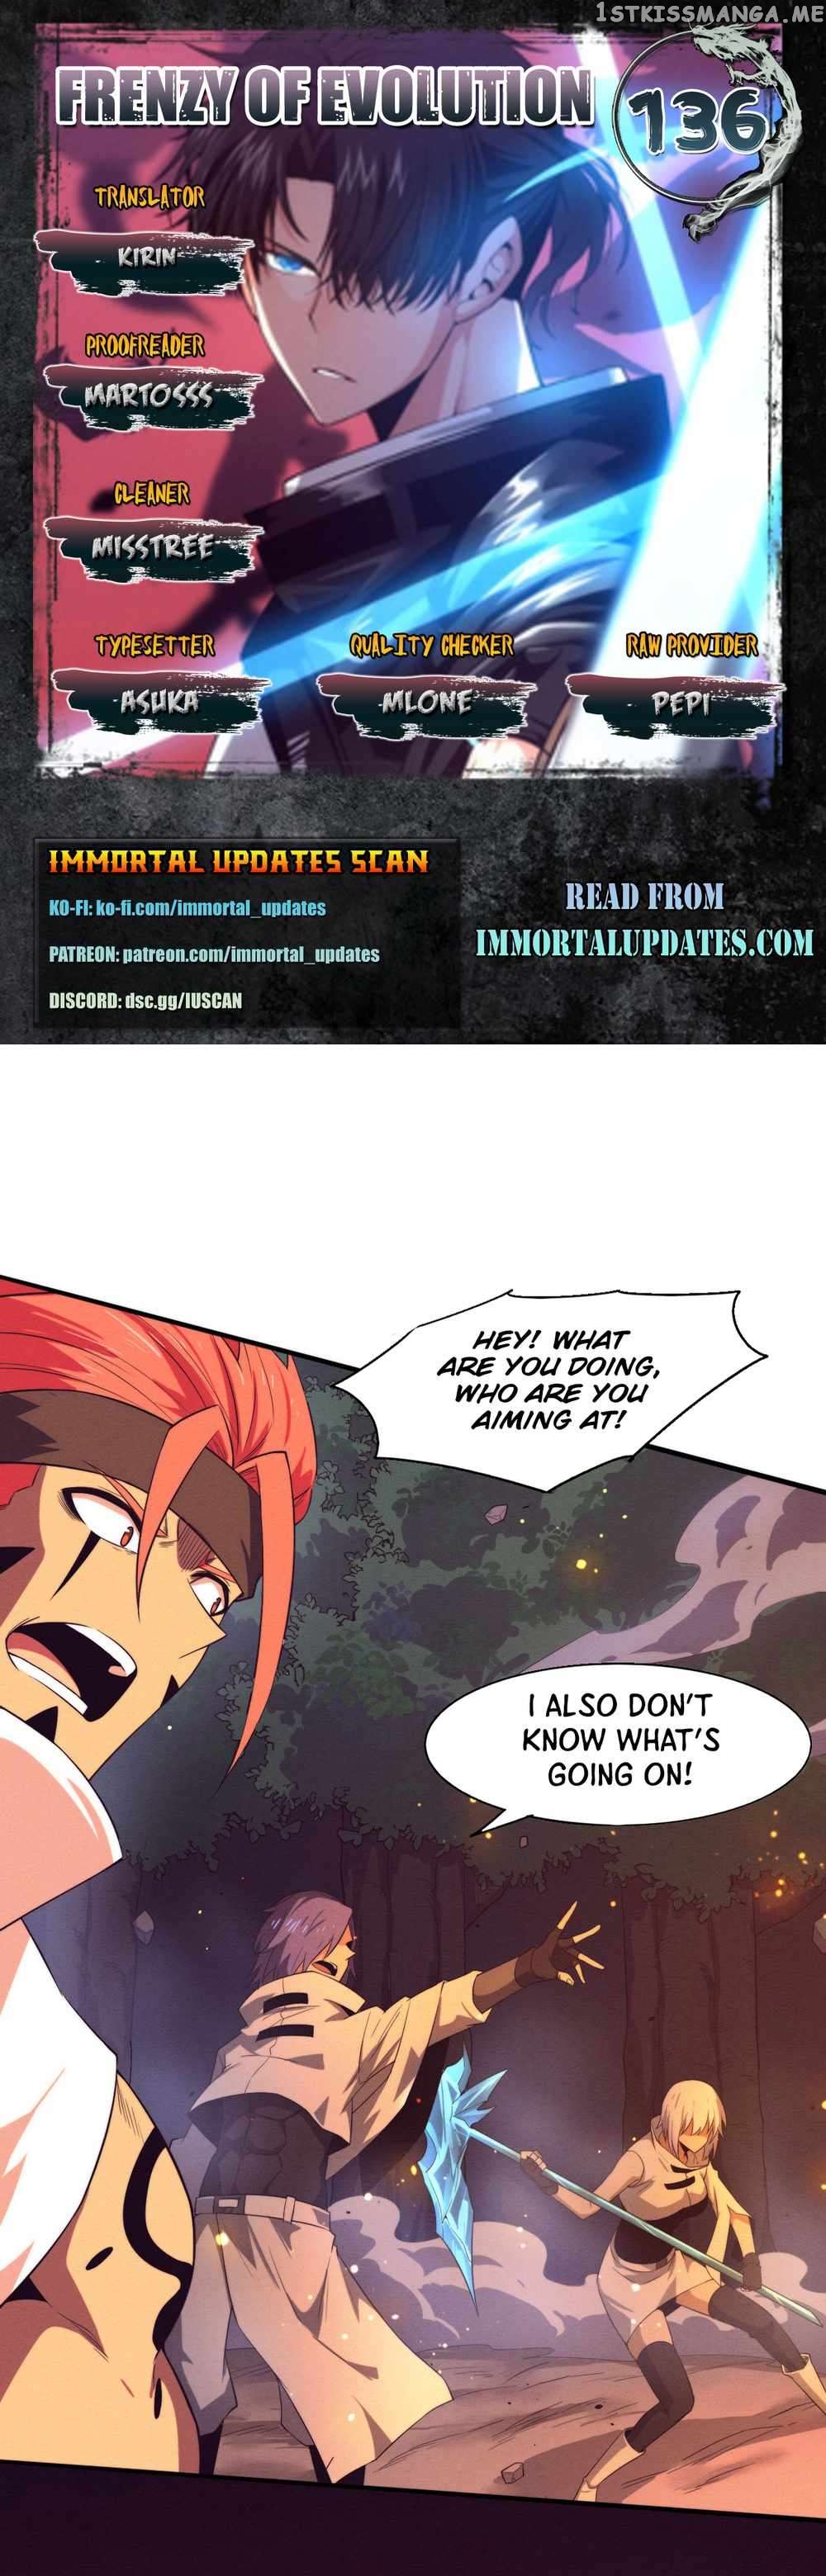 Evolution frenzy Chapter 136 - page 1